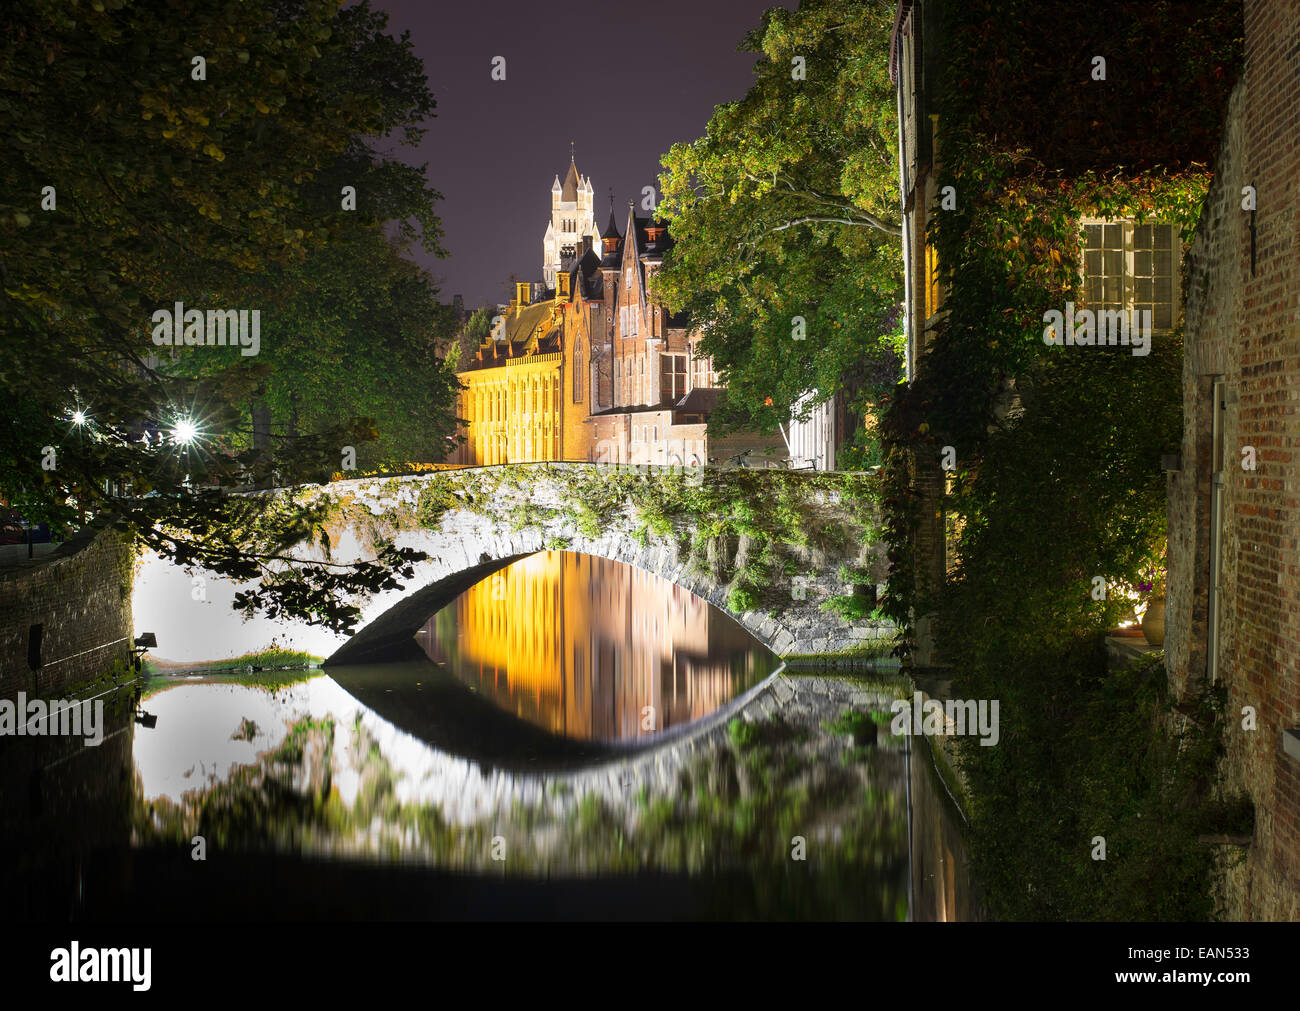 Bruges at night Stock Photo